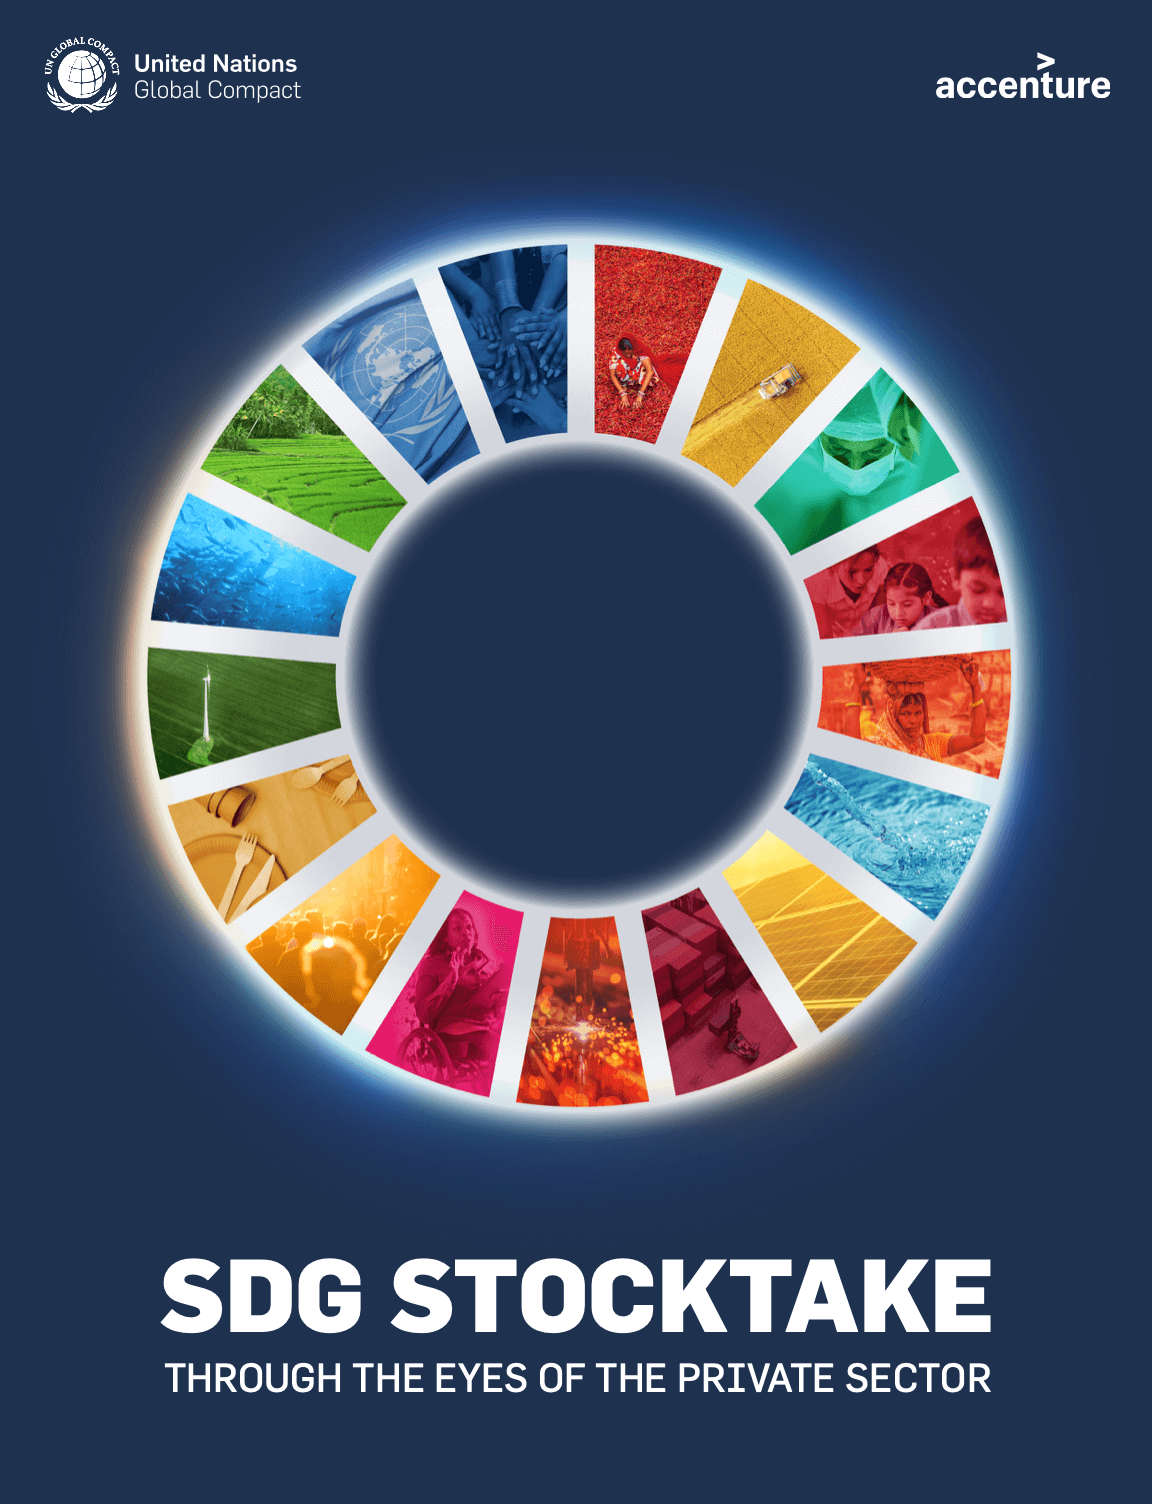 SDG Stocktake: Through the eyes of the Private Sector